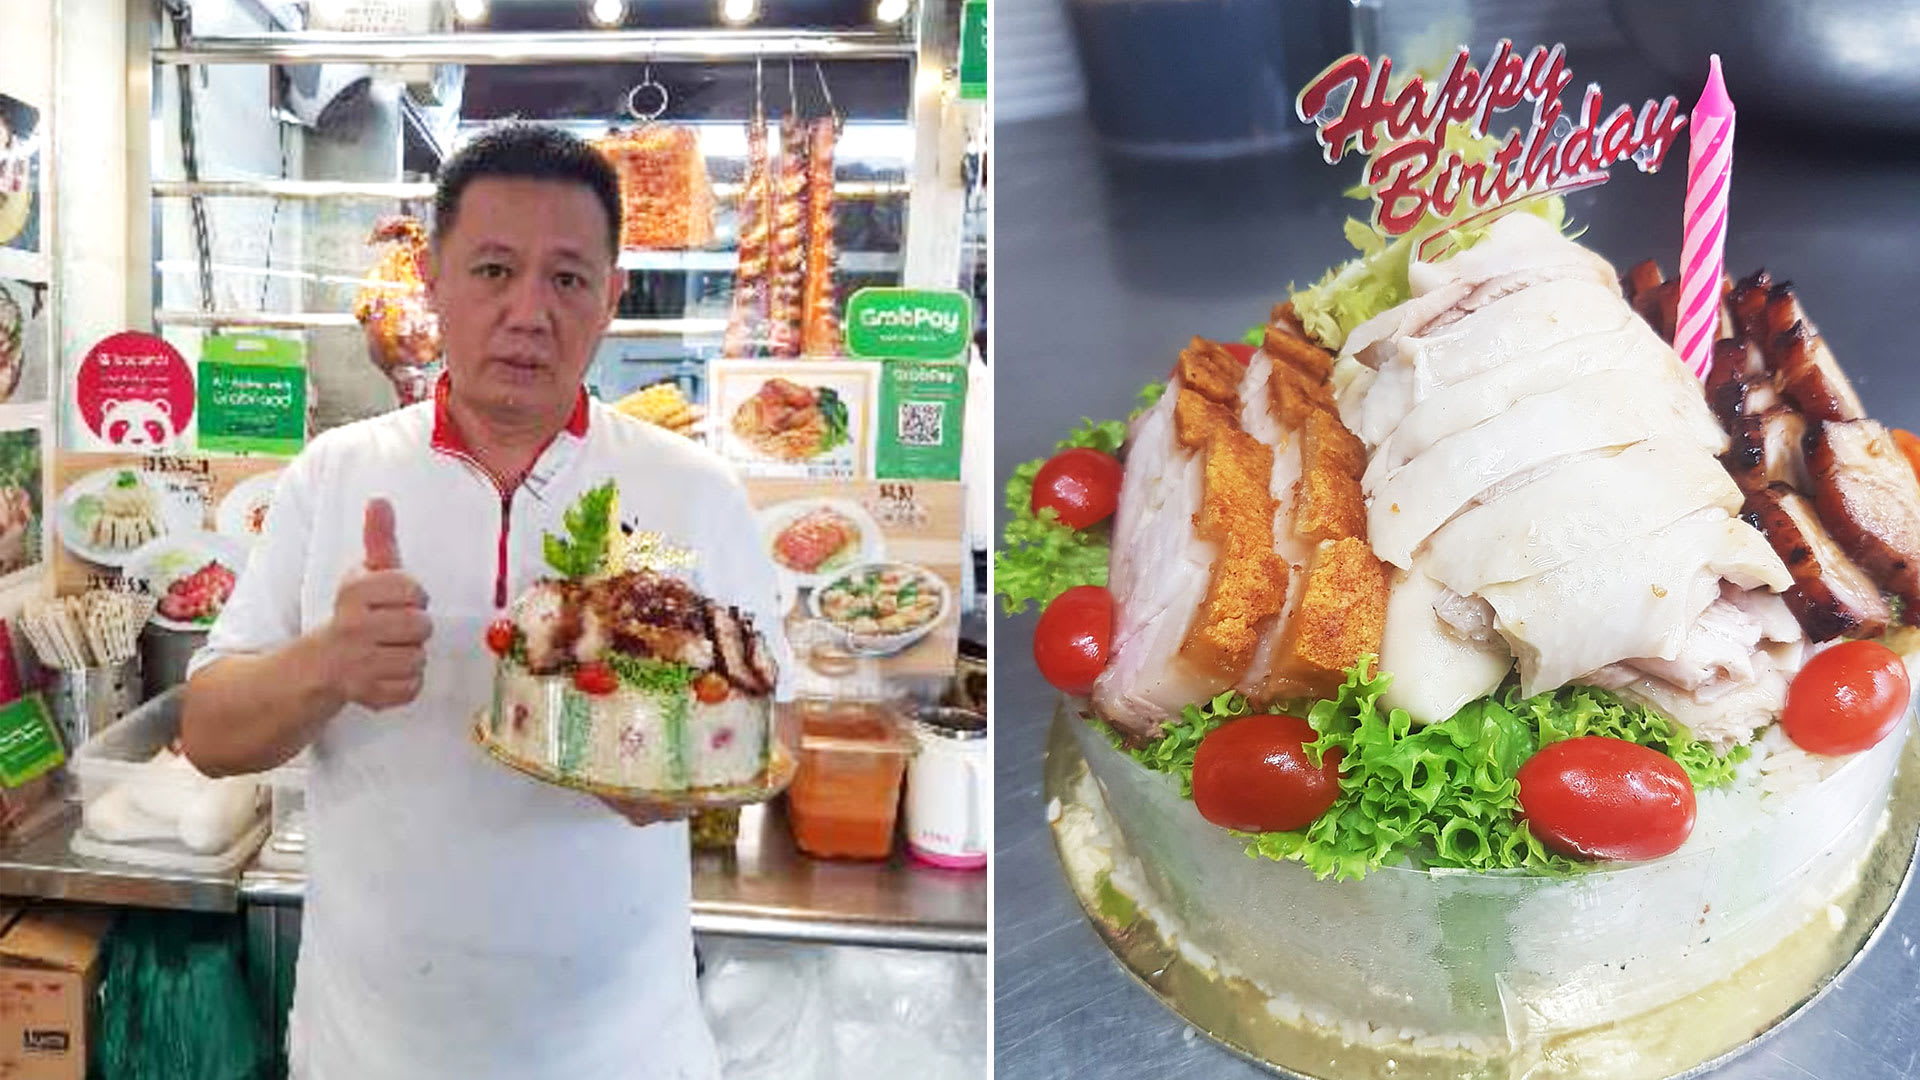 Hilton Chef-Turned-Hawker Sells ‘Birthday Cakes’ Made With Chicken Rice & Roast Pork